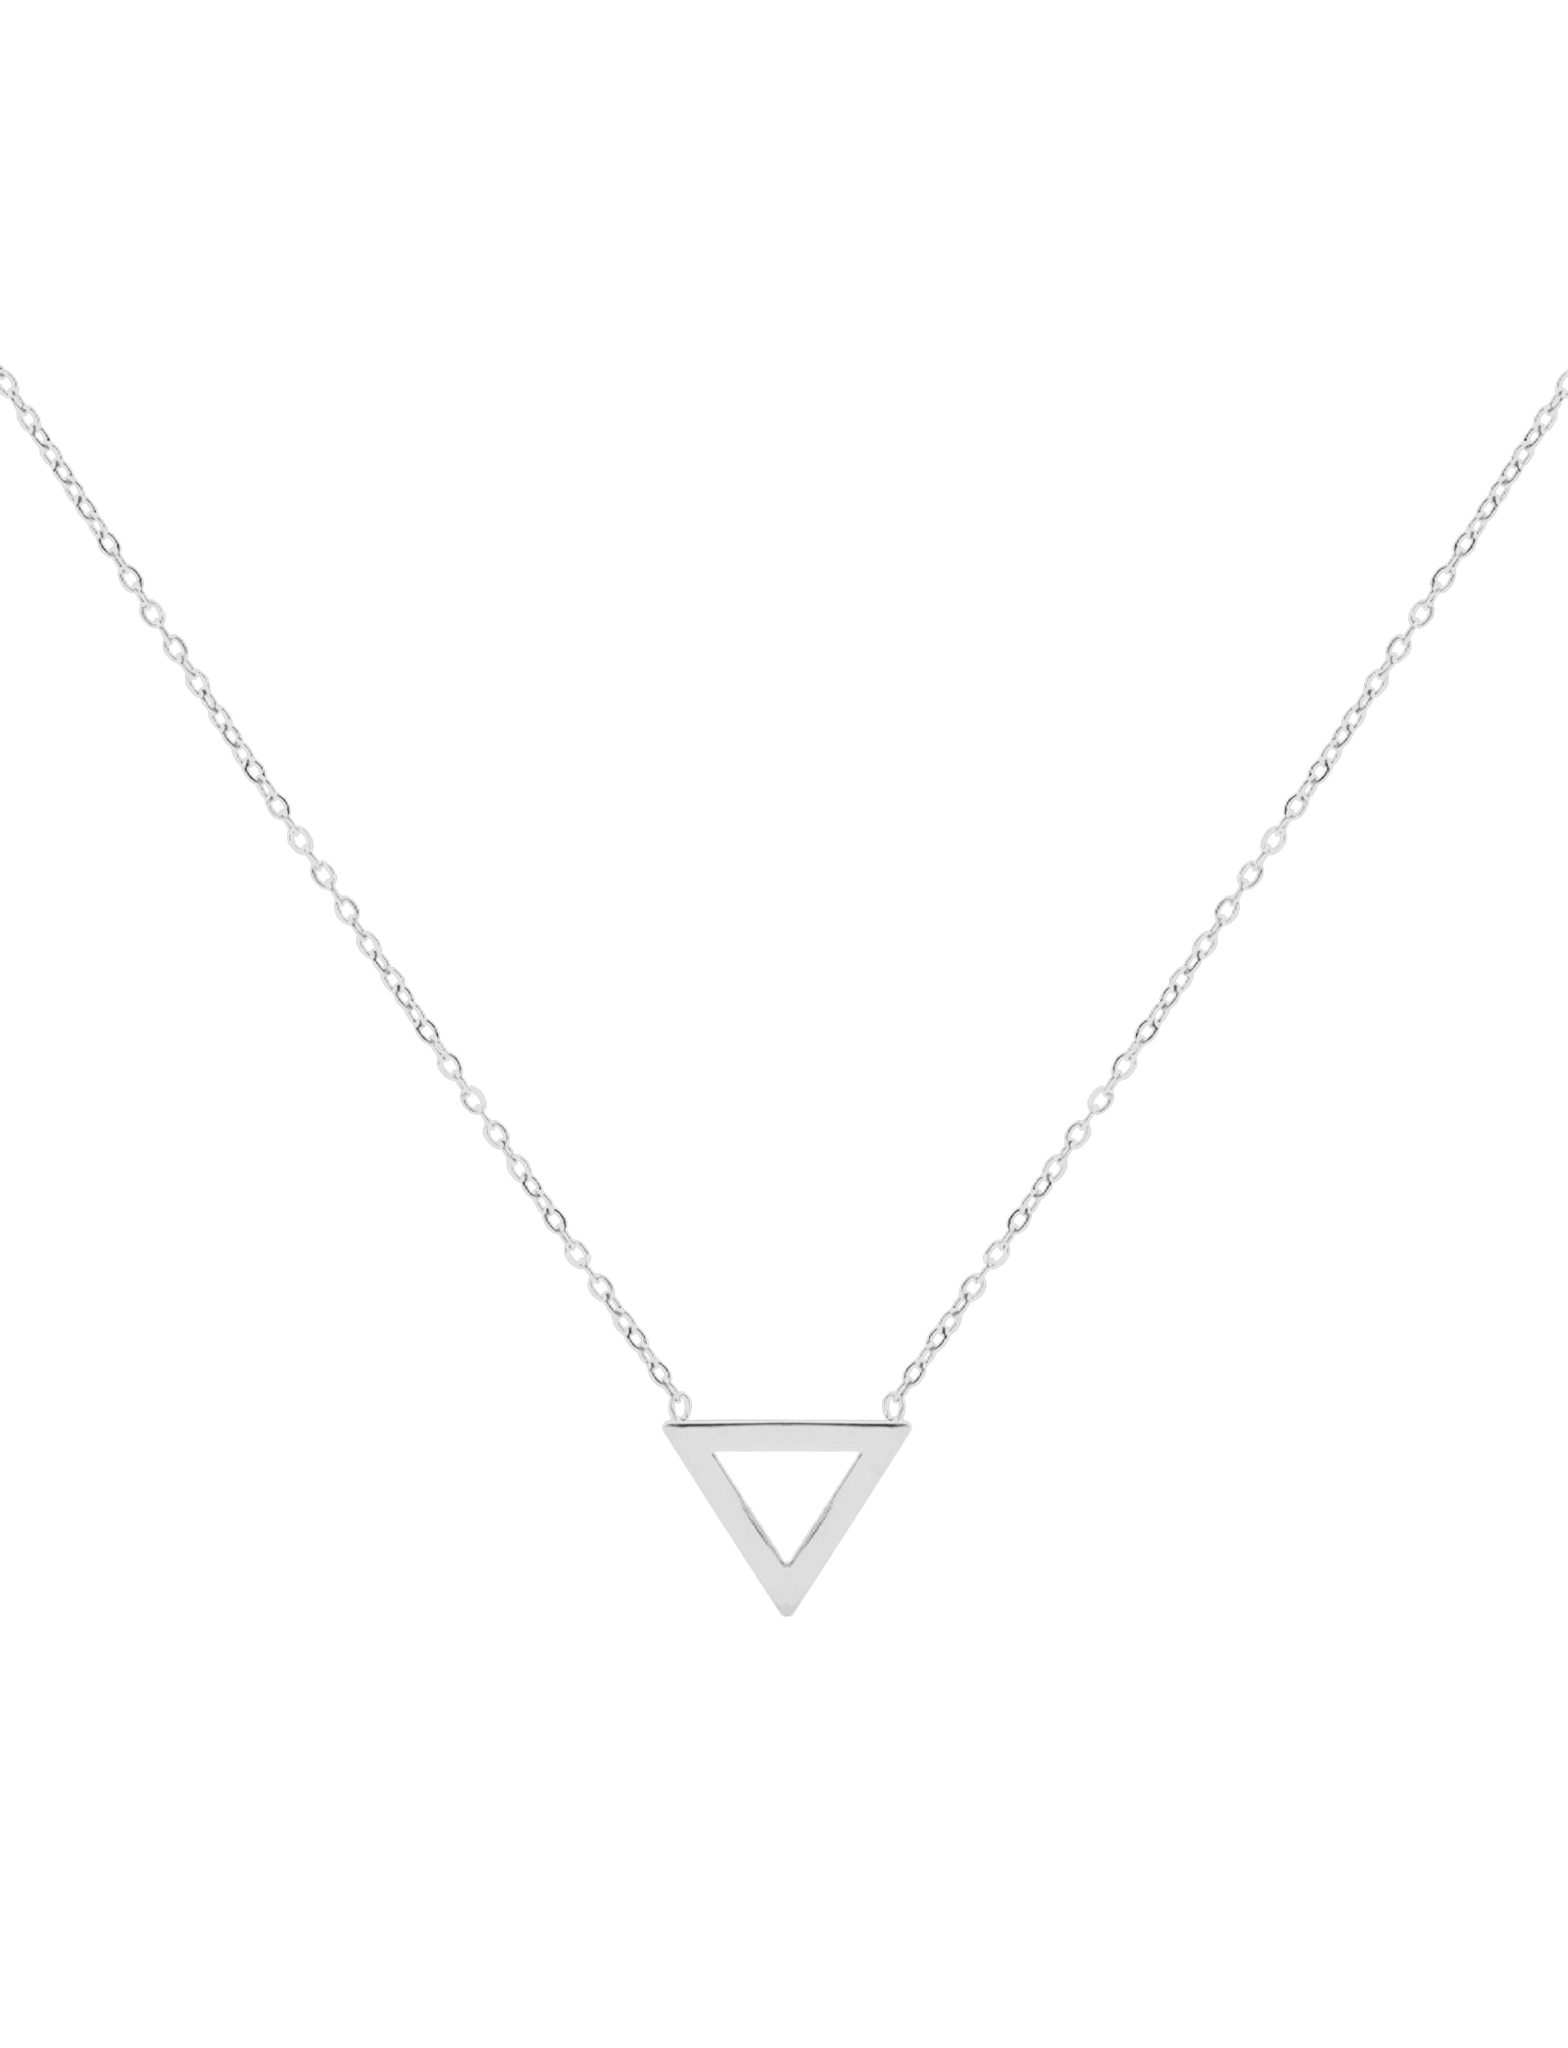 Necklace VUCH Drotis Silver